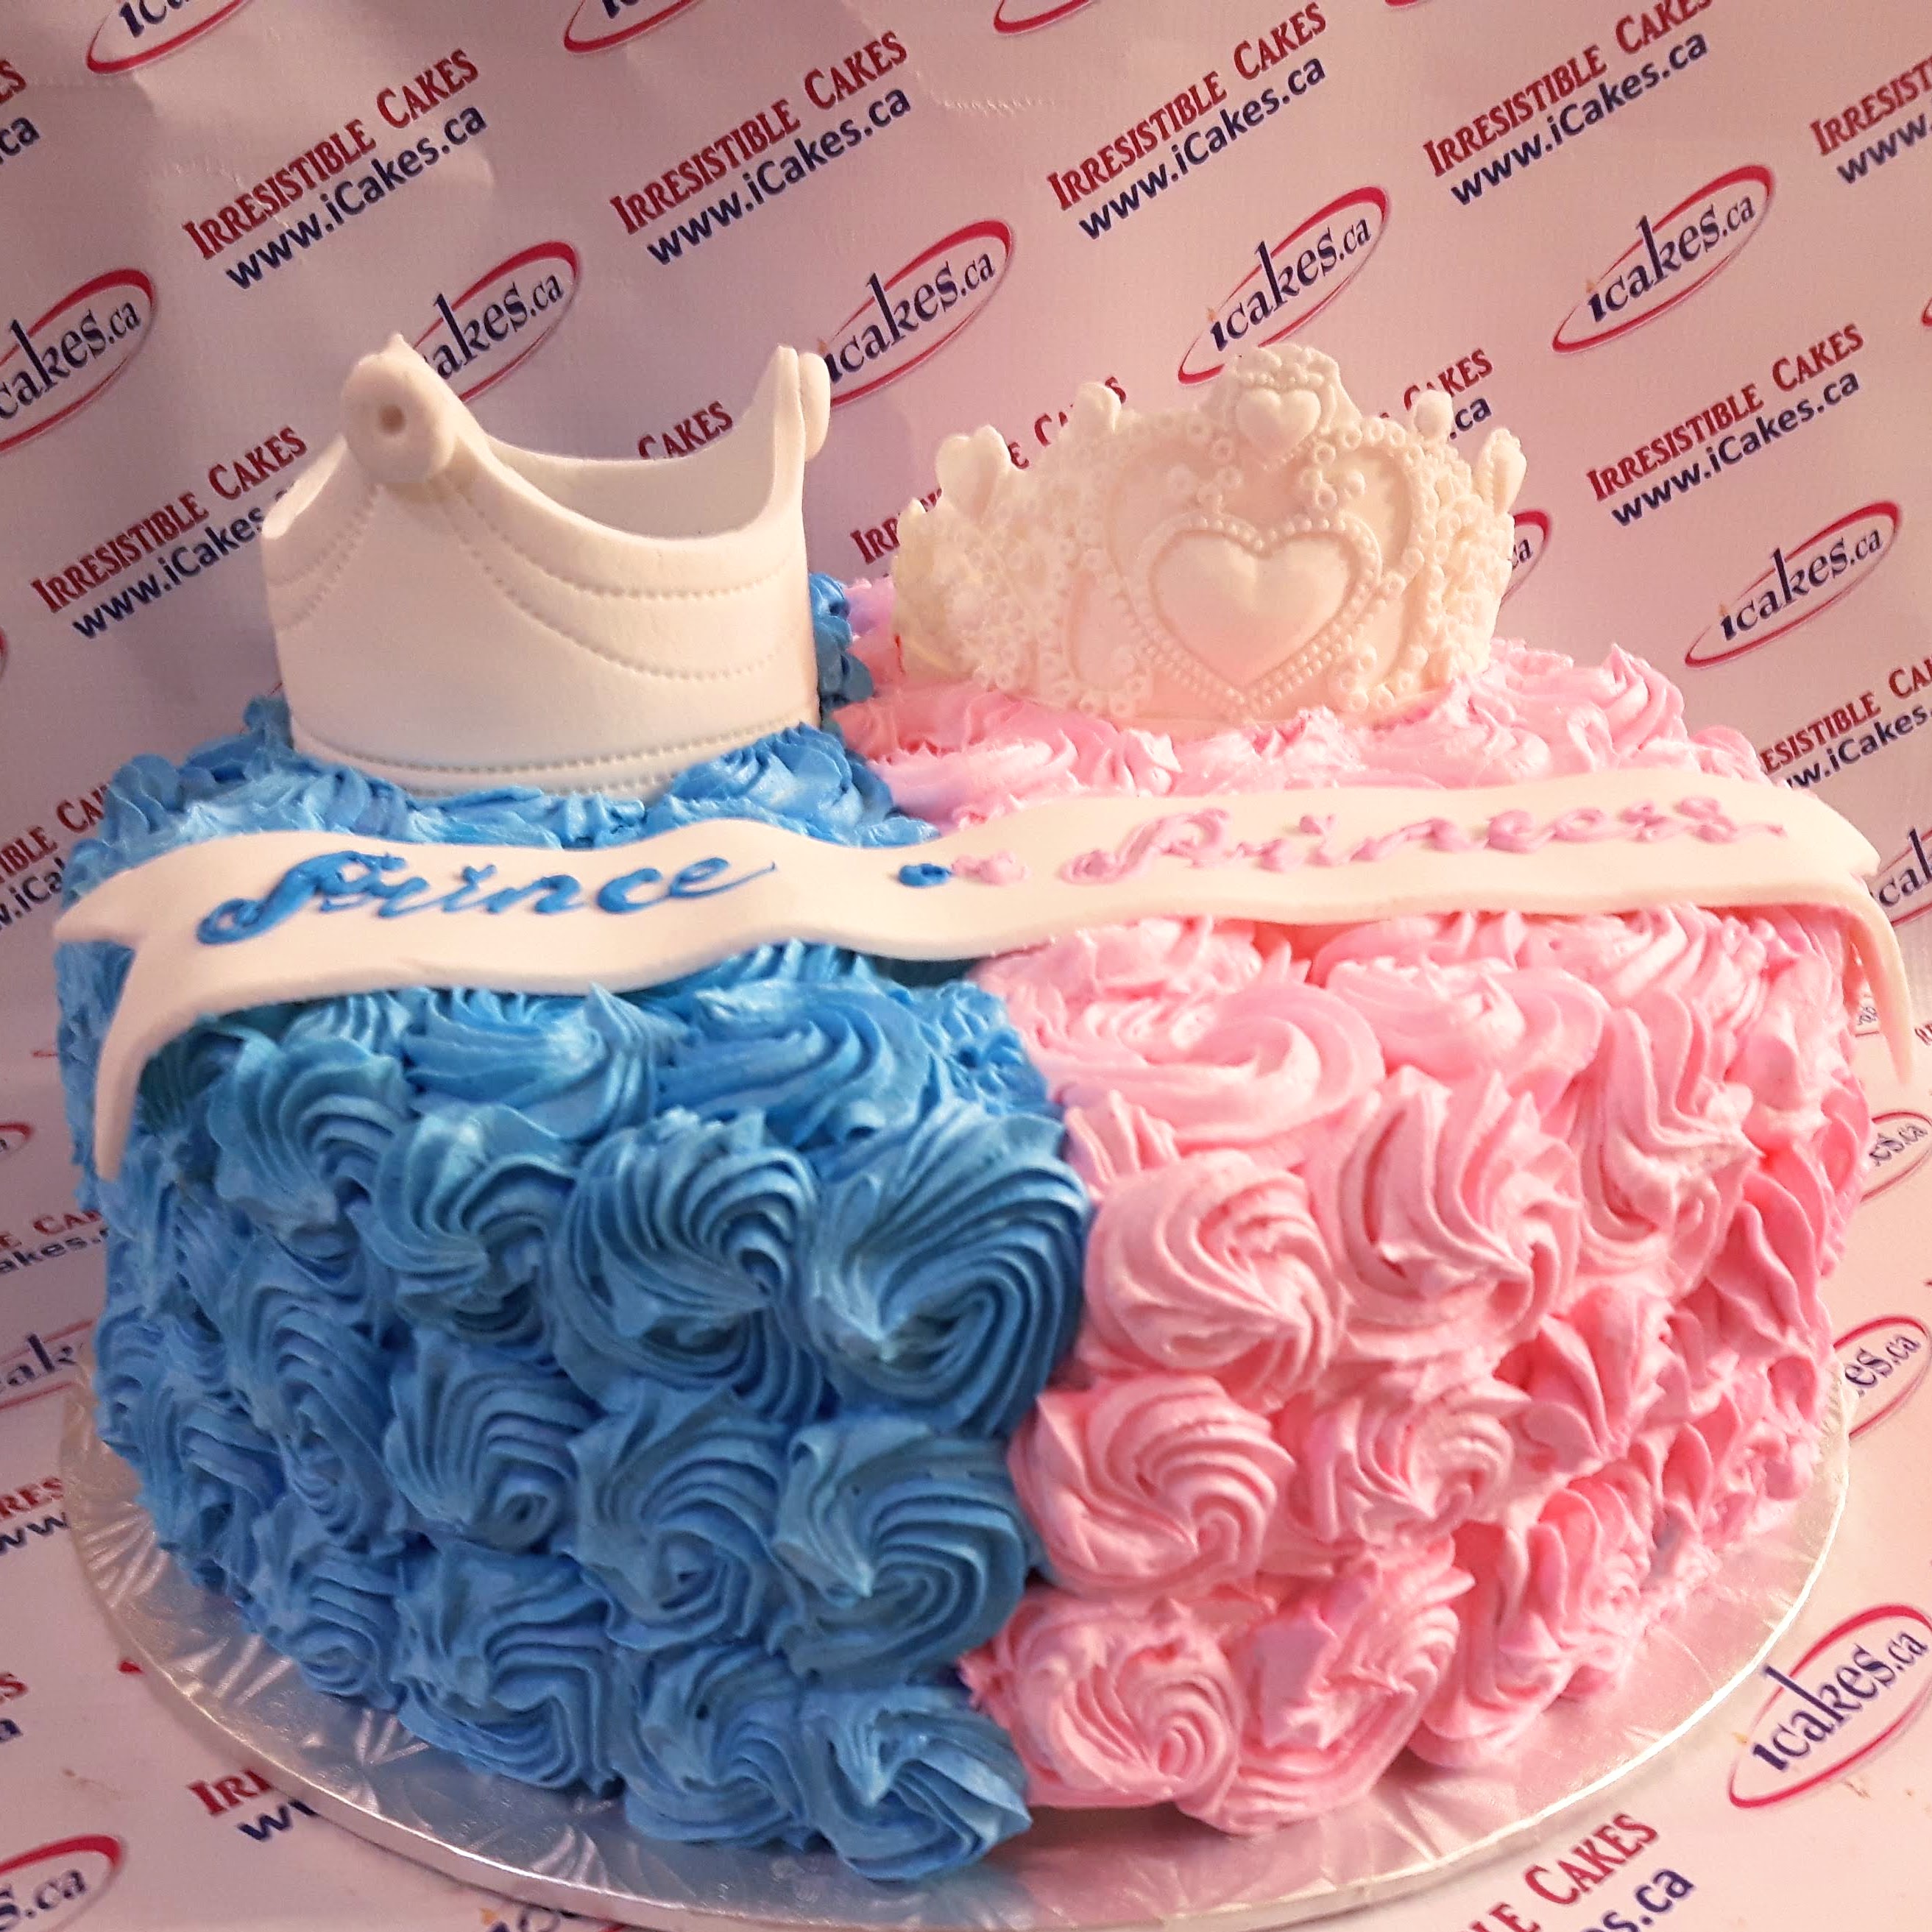 Two Tiered Baby Bottom Baby Shower Cake | cakewaves-mncb.edu.vn